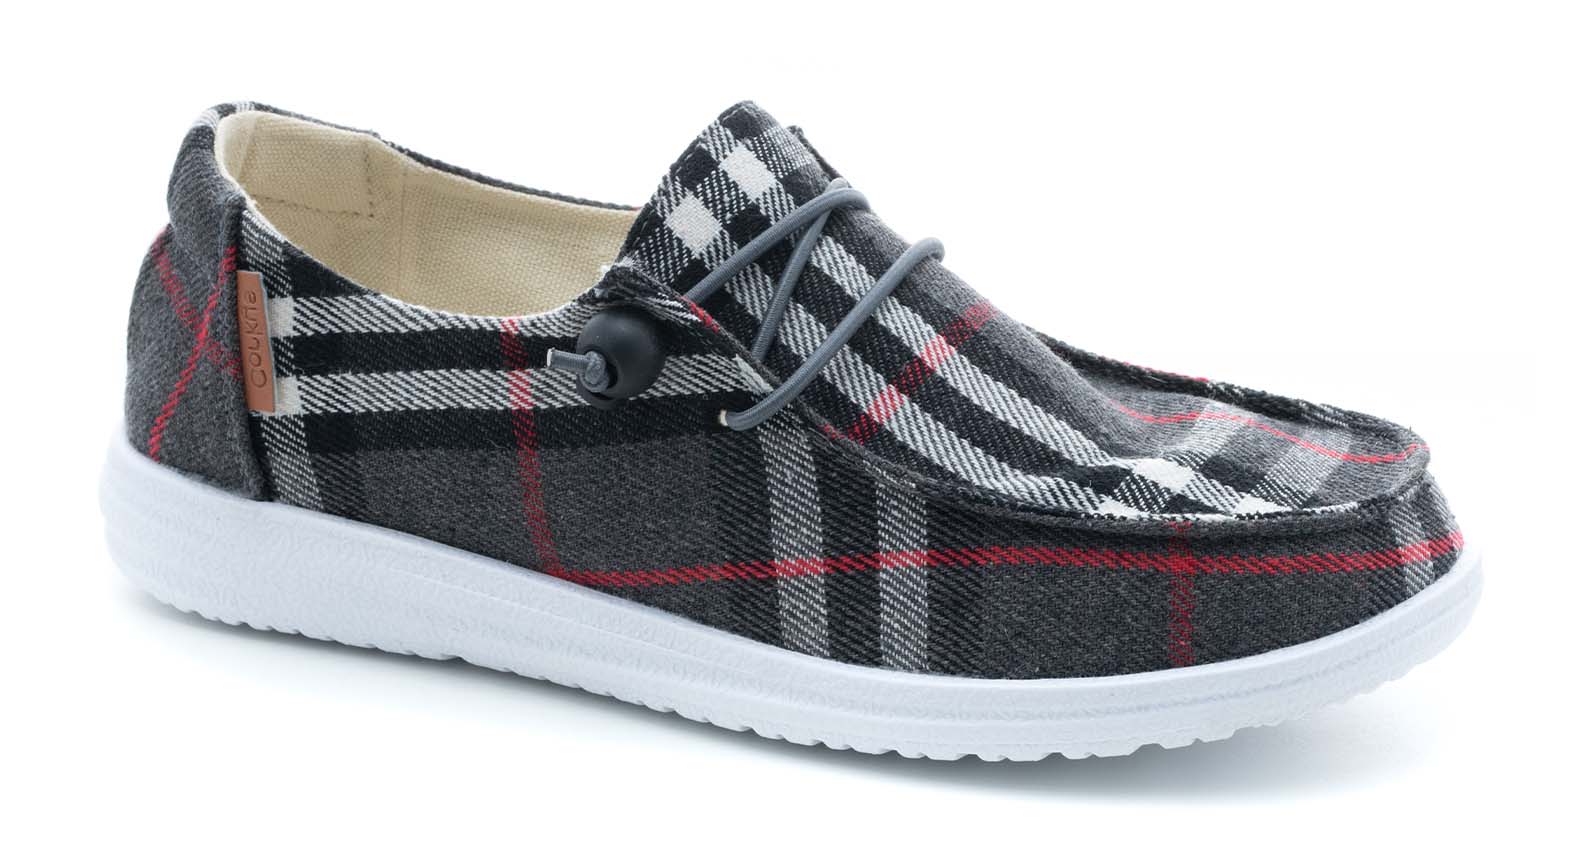 Corkys Shoes - Kayak Grey Flannel Slip On Sneakers  SALE 40% OFF  NOW $19.95